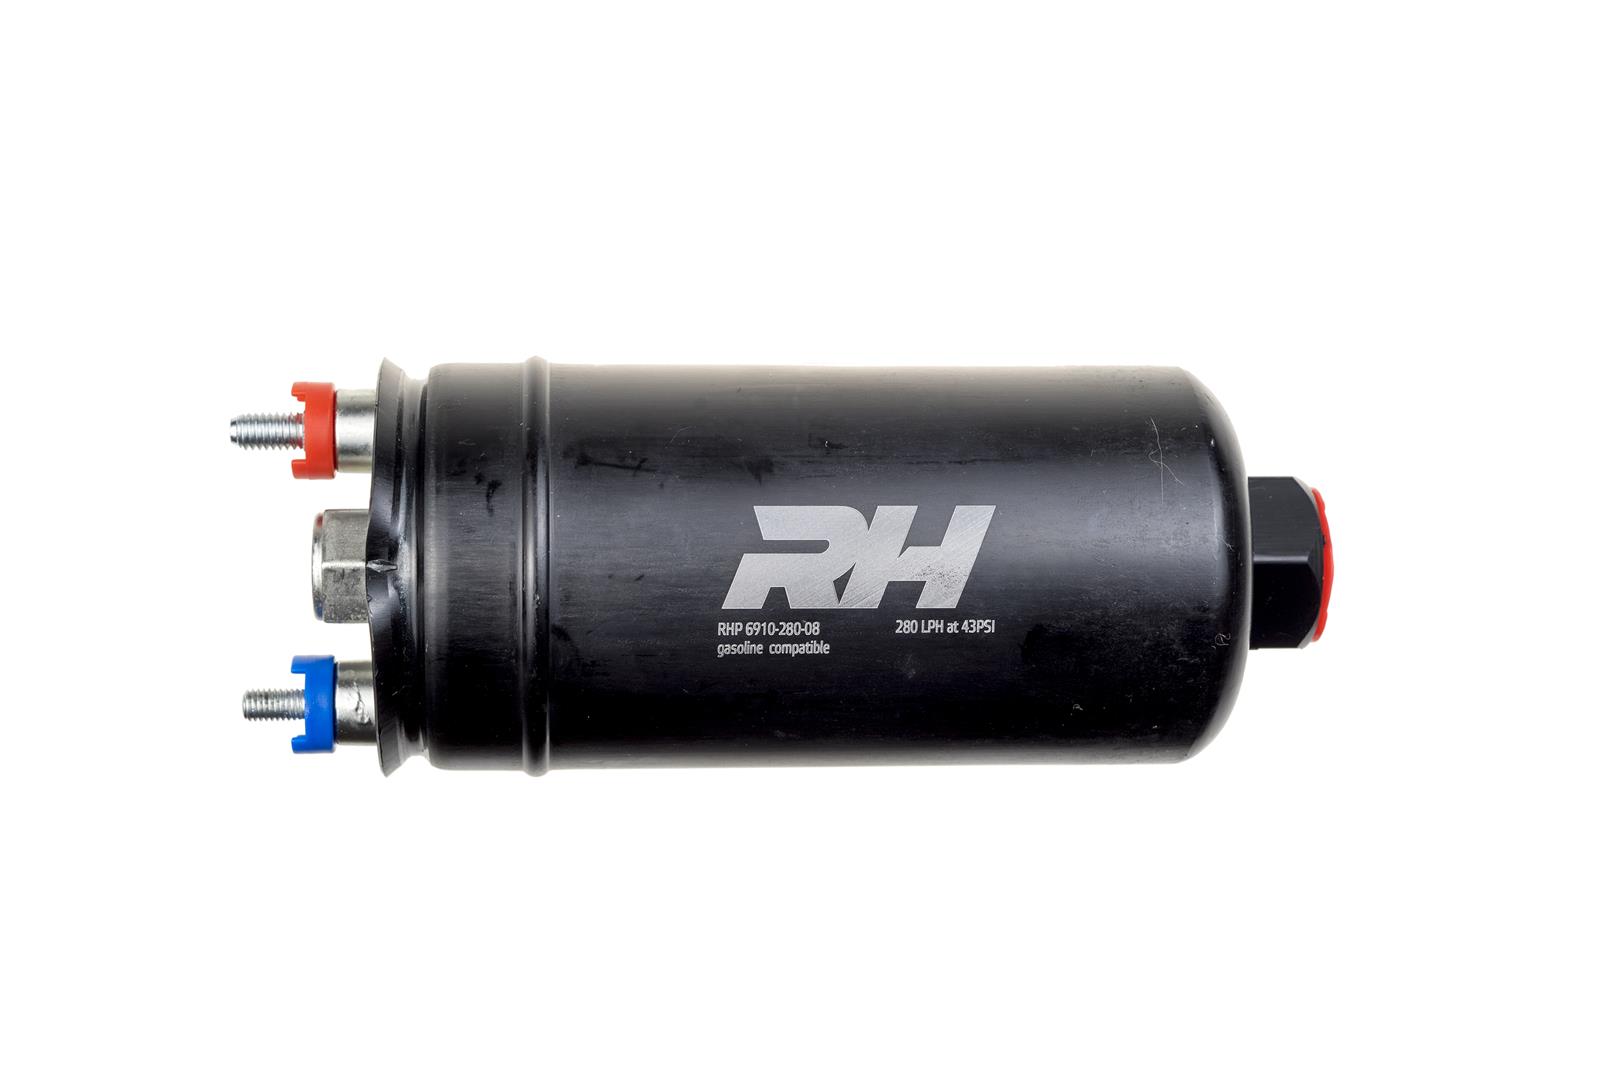 Redhorse Performance 6910-280-08 Universal Inline Fuel Pump AN8 outlet, AN10 inlet